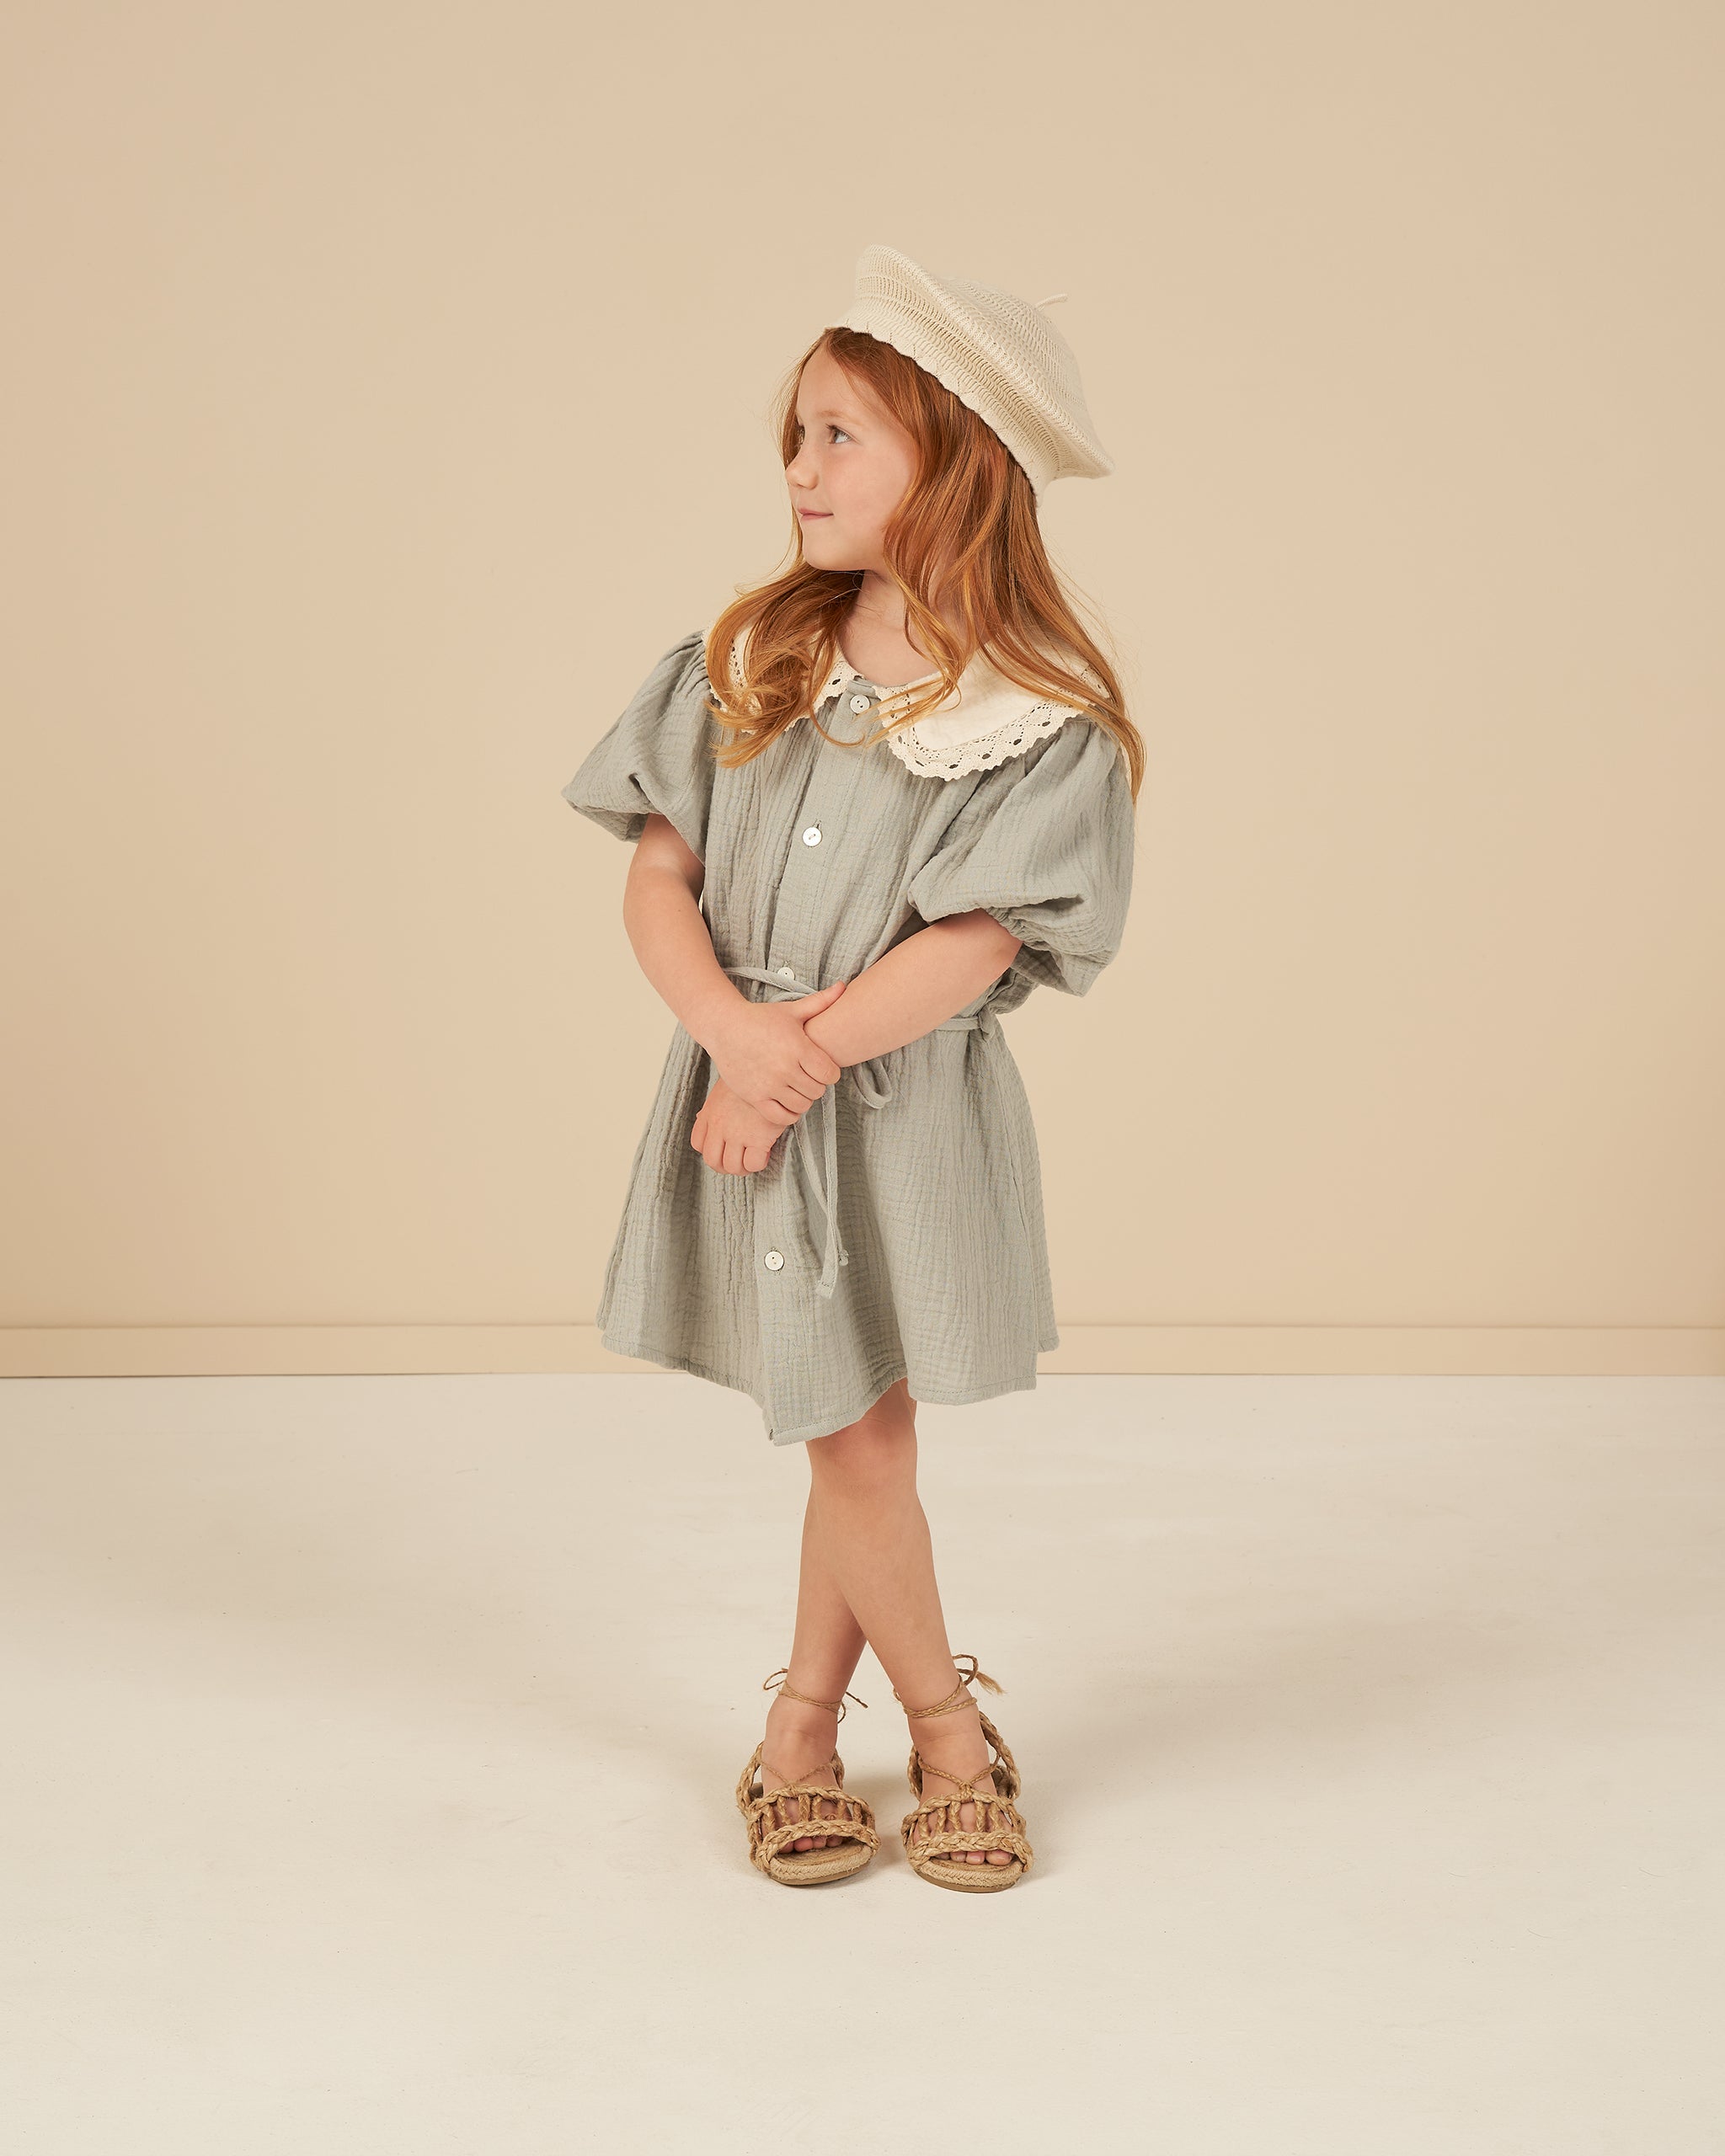 Olive Dress || Seafoam - Rylee + Cru | Kids Clothes | Trendy Baby Clothes | Modern Infant Outfits |